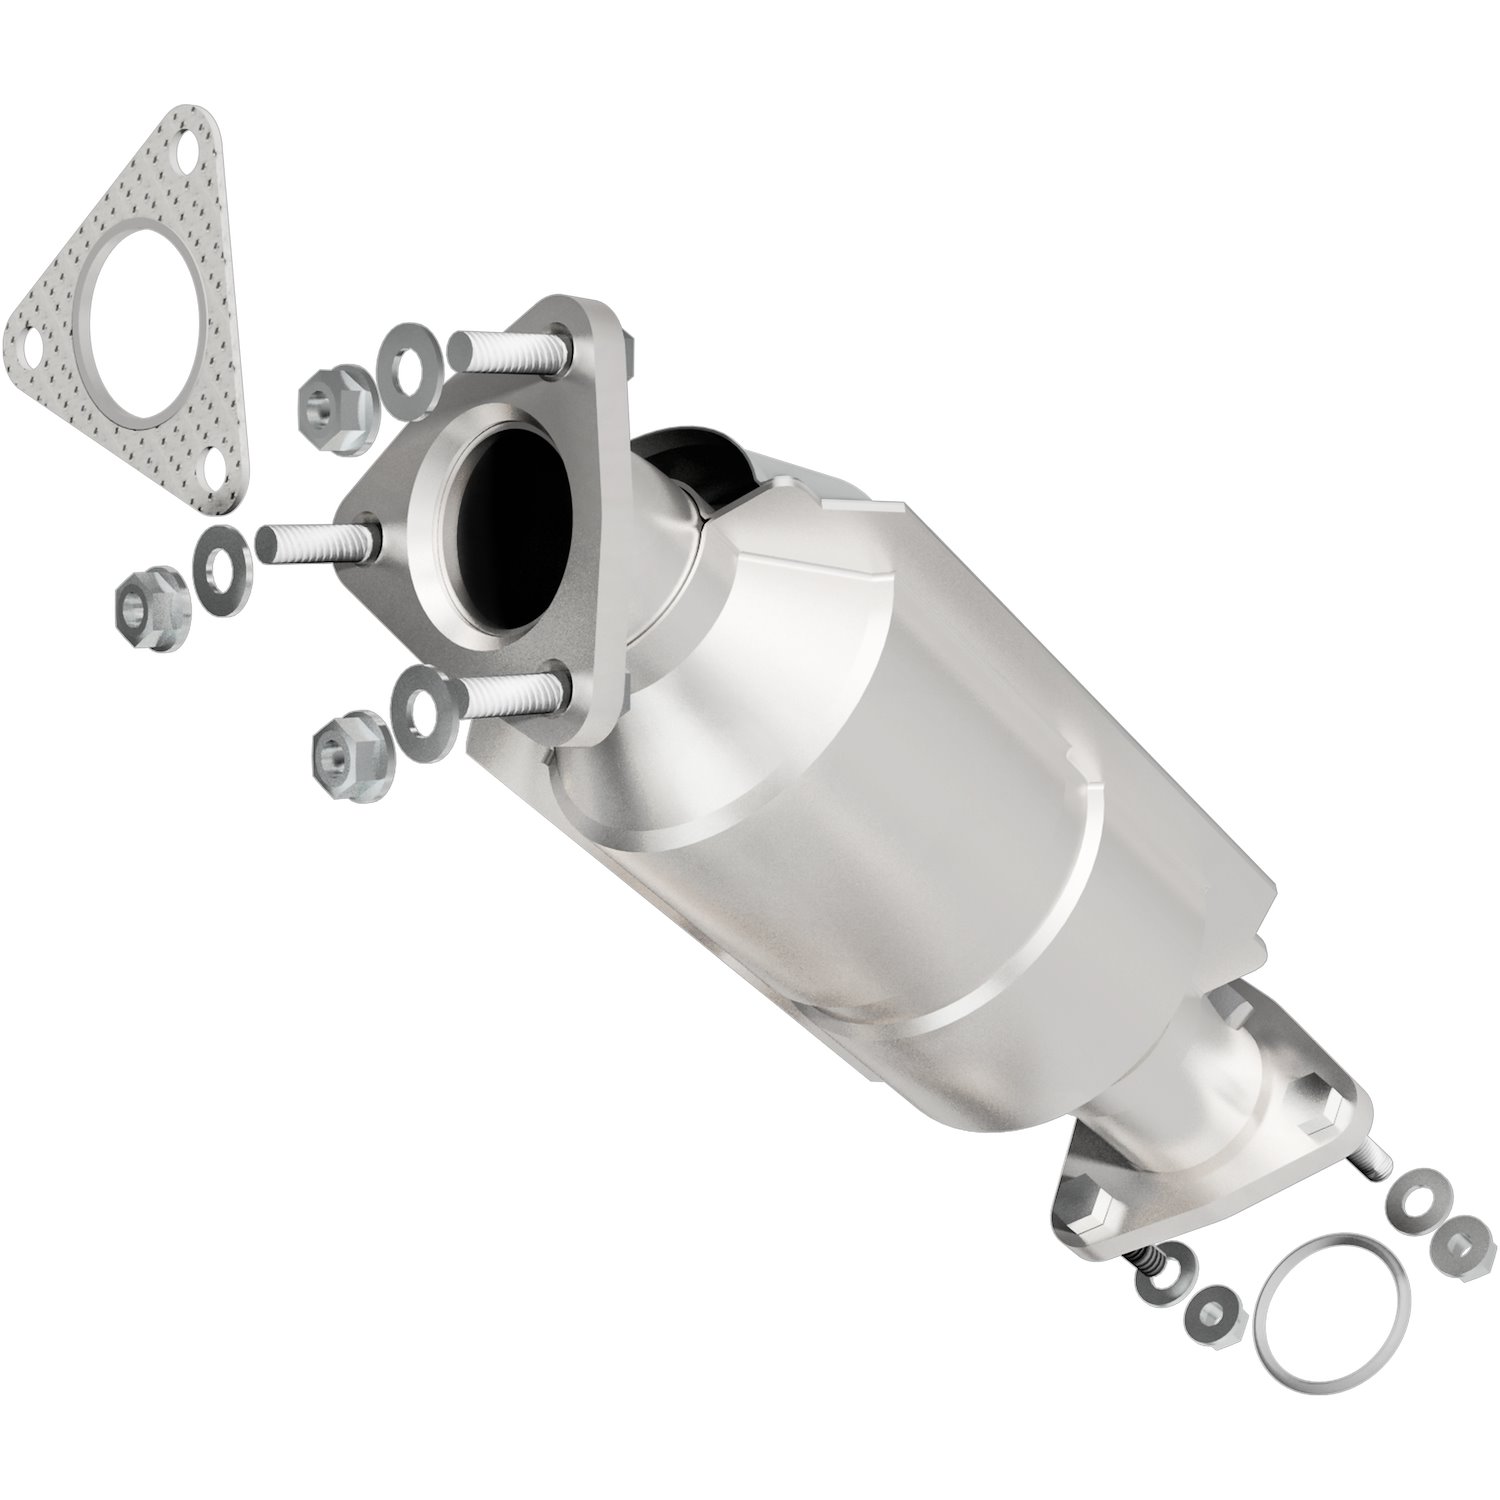 OEM Grade Federal / EPA Compliant Direct-Fit Catalytic Converter 49477